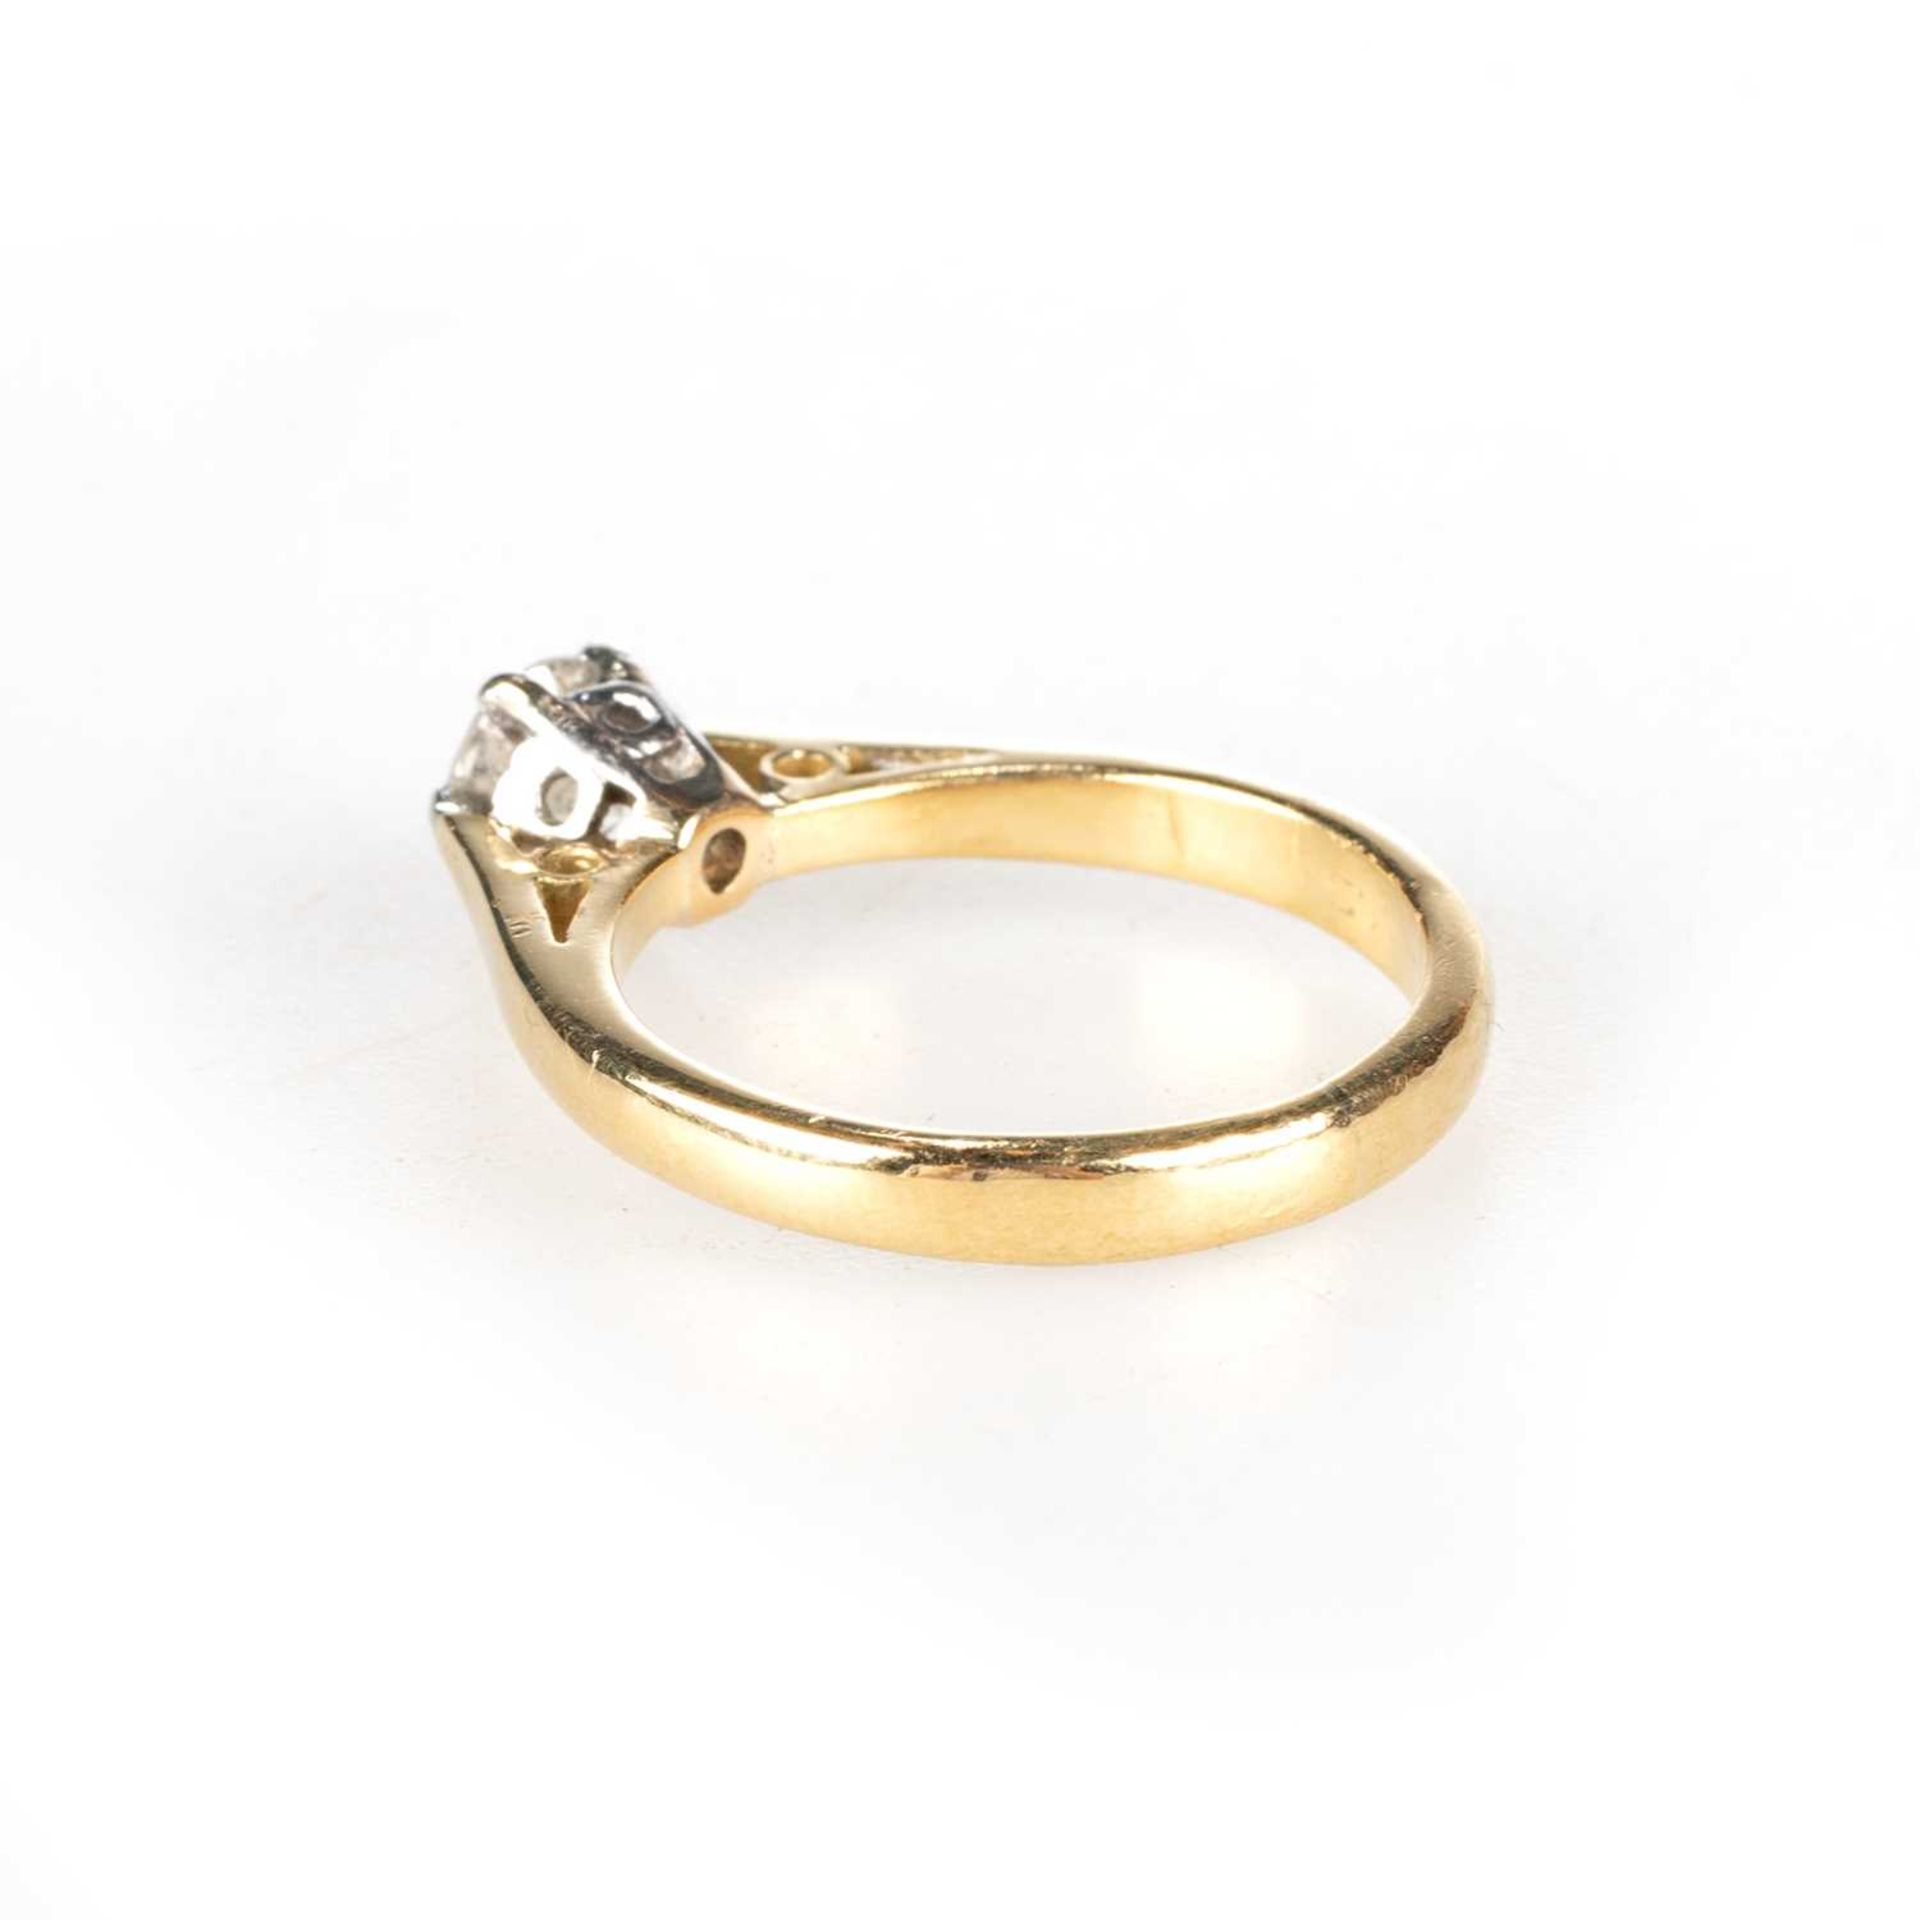 AN 18 CARAT GOLD SOLITAIRE DIAMOND RING - Image 3 of 4